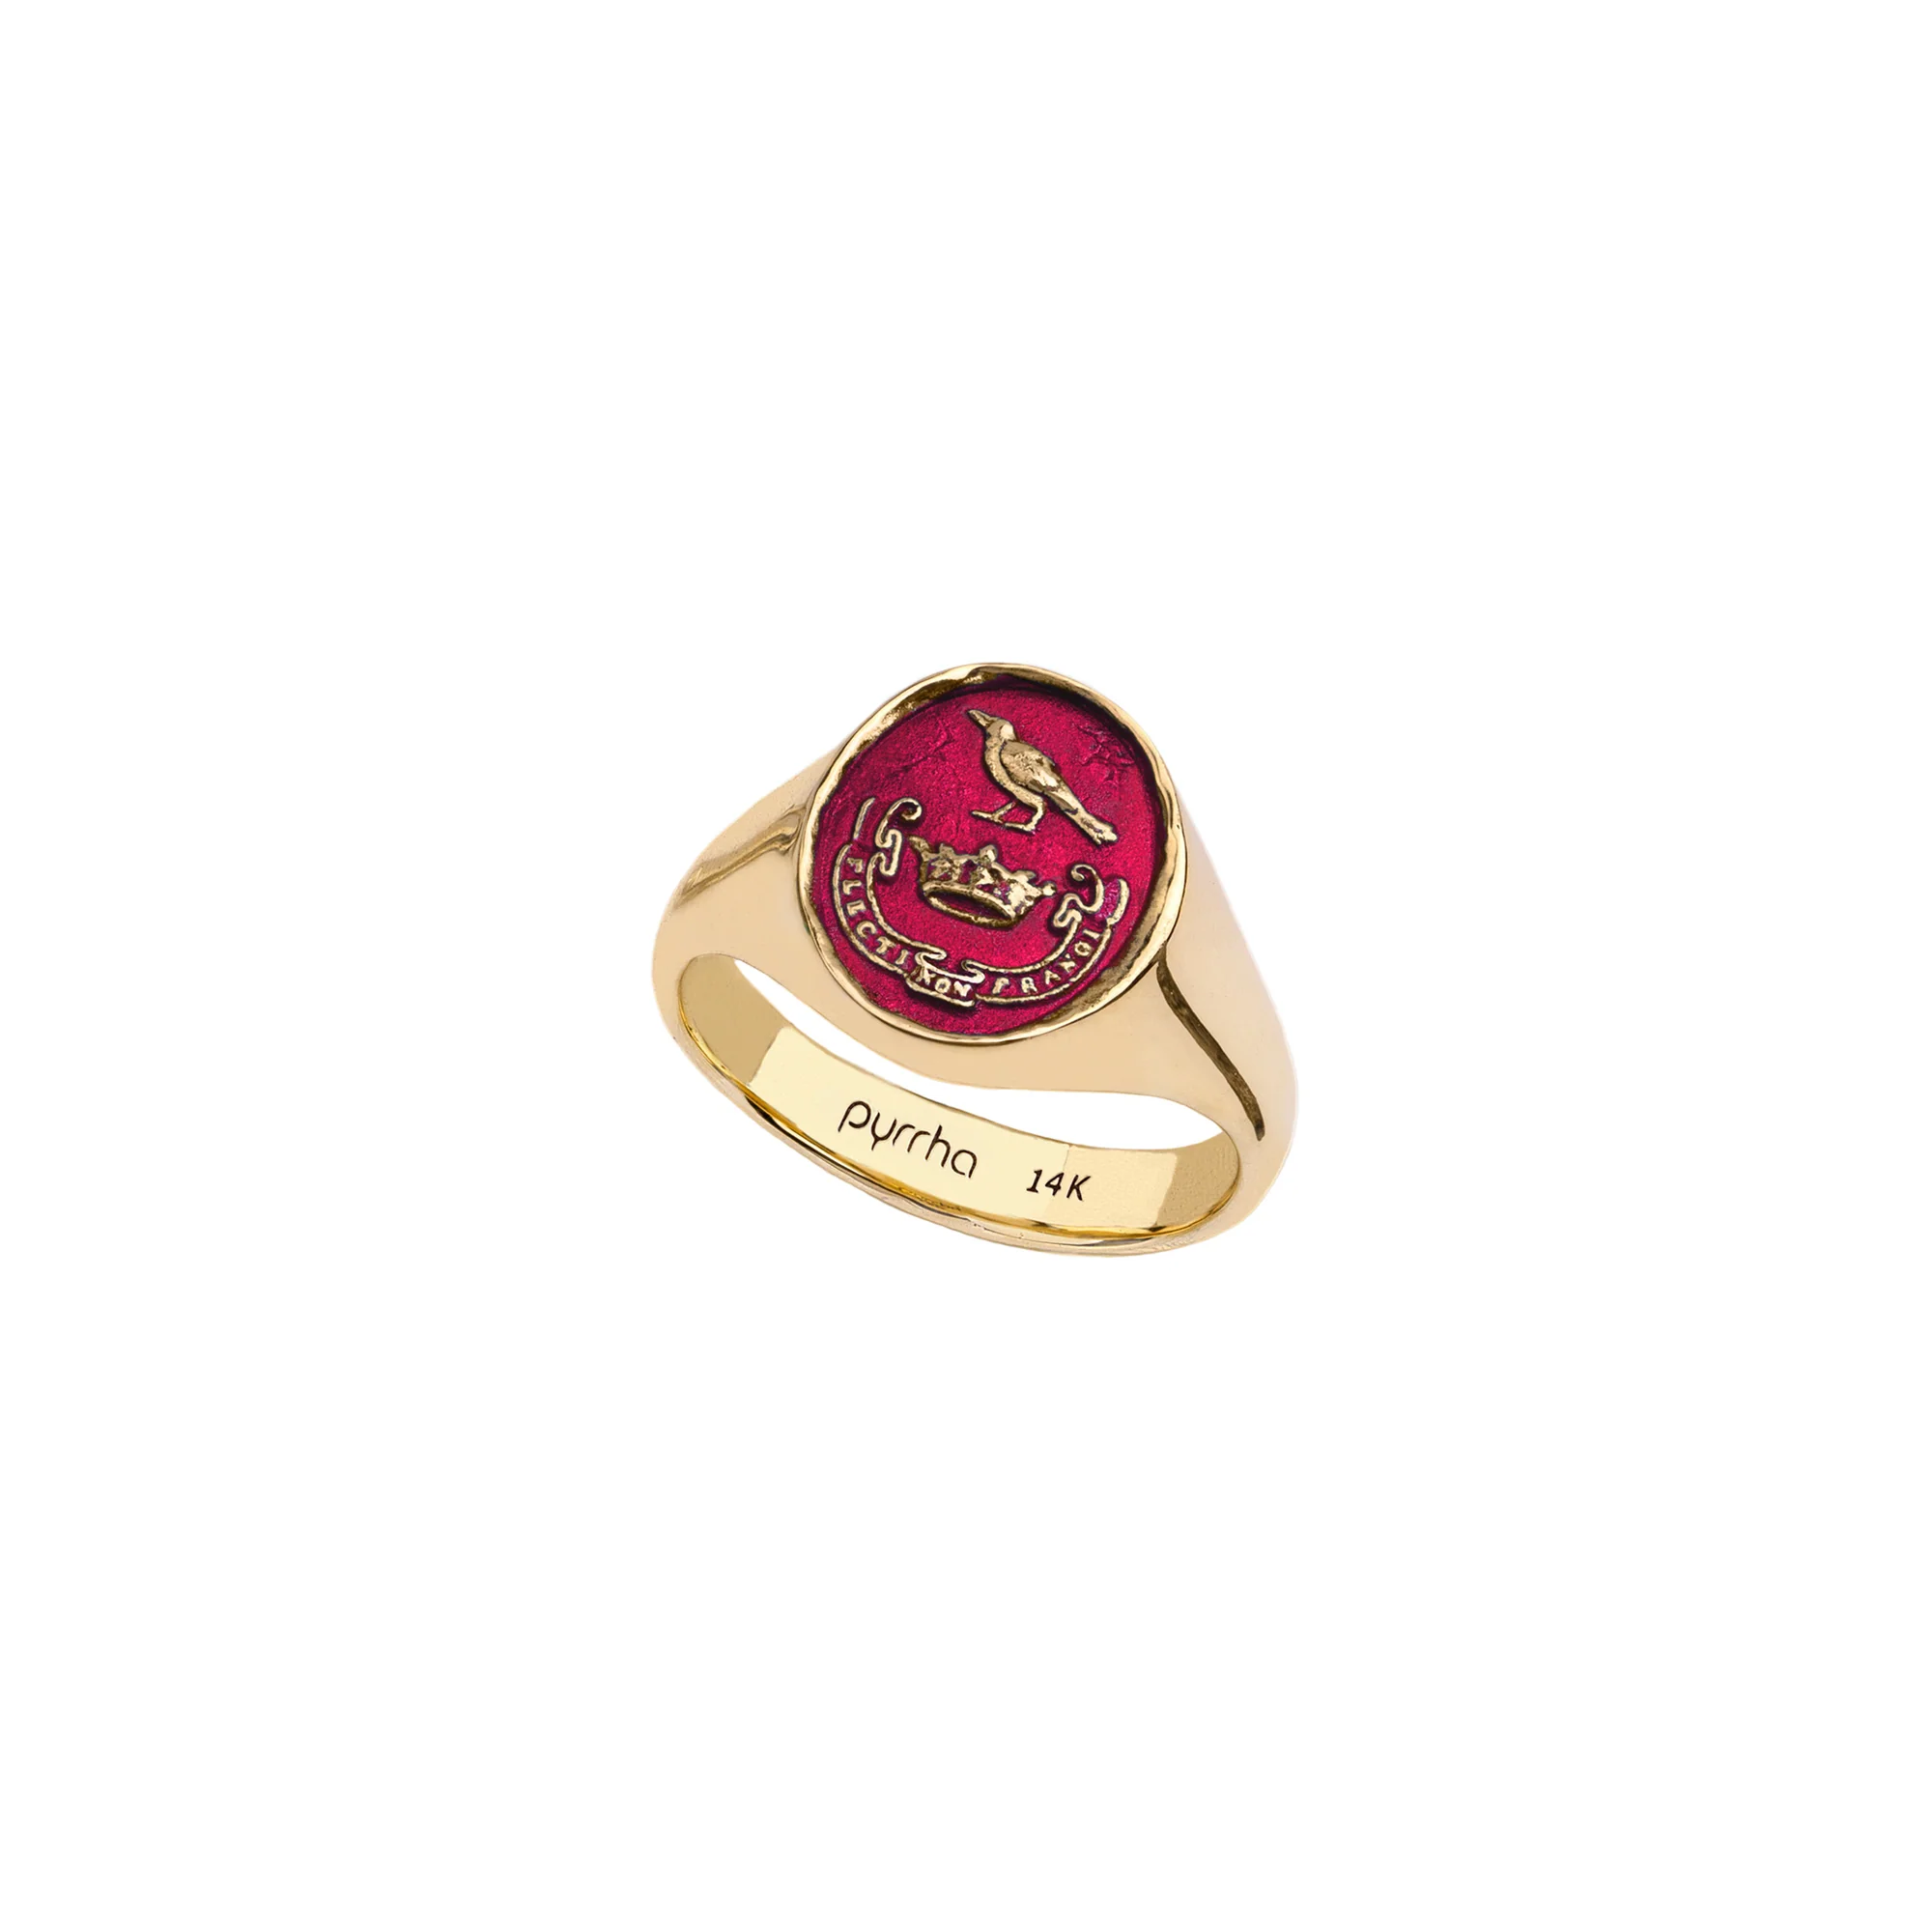 Unbreakable 14K Gold Signet Ring - True Colors | Magpie Jewellery